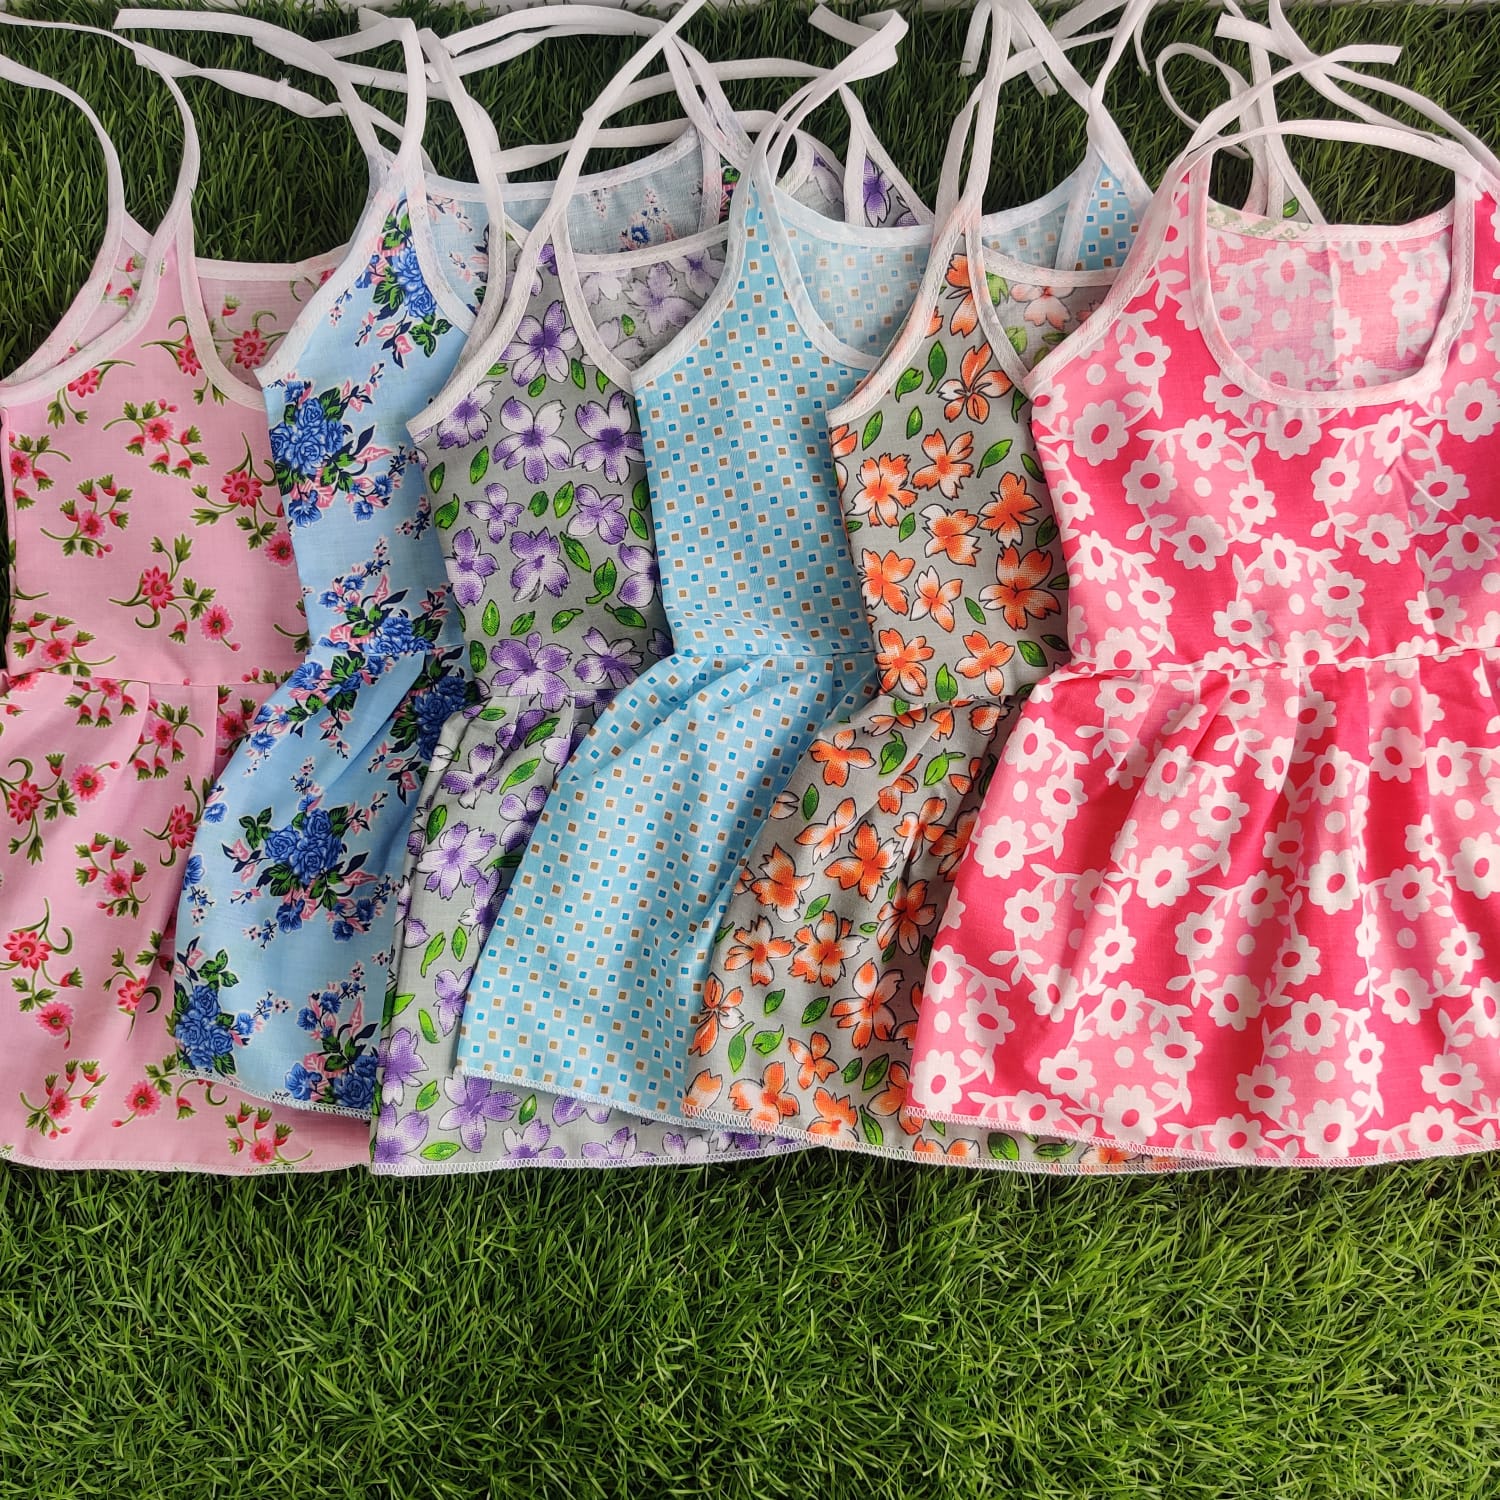 Adorable Cute Baby Frock For Girls  The Bobo Store